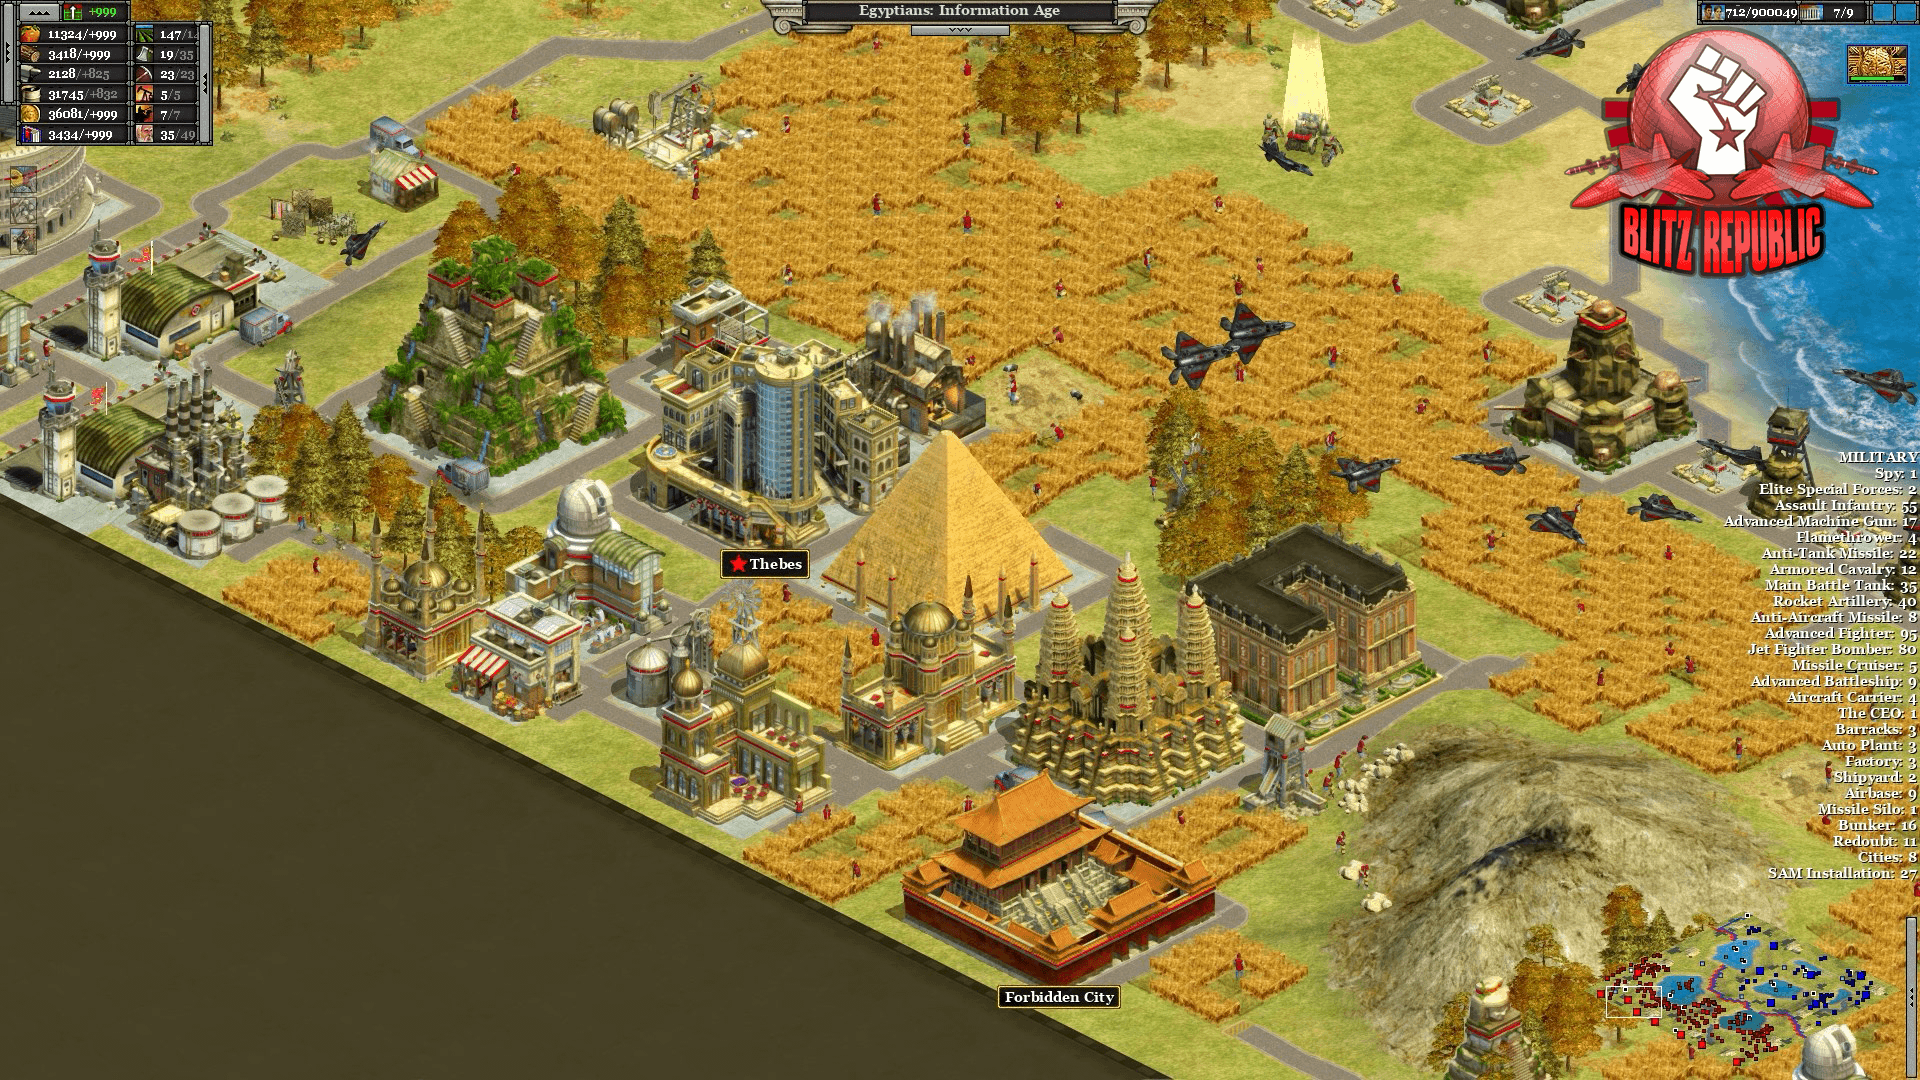 Rise Of Nations Extended Edition